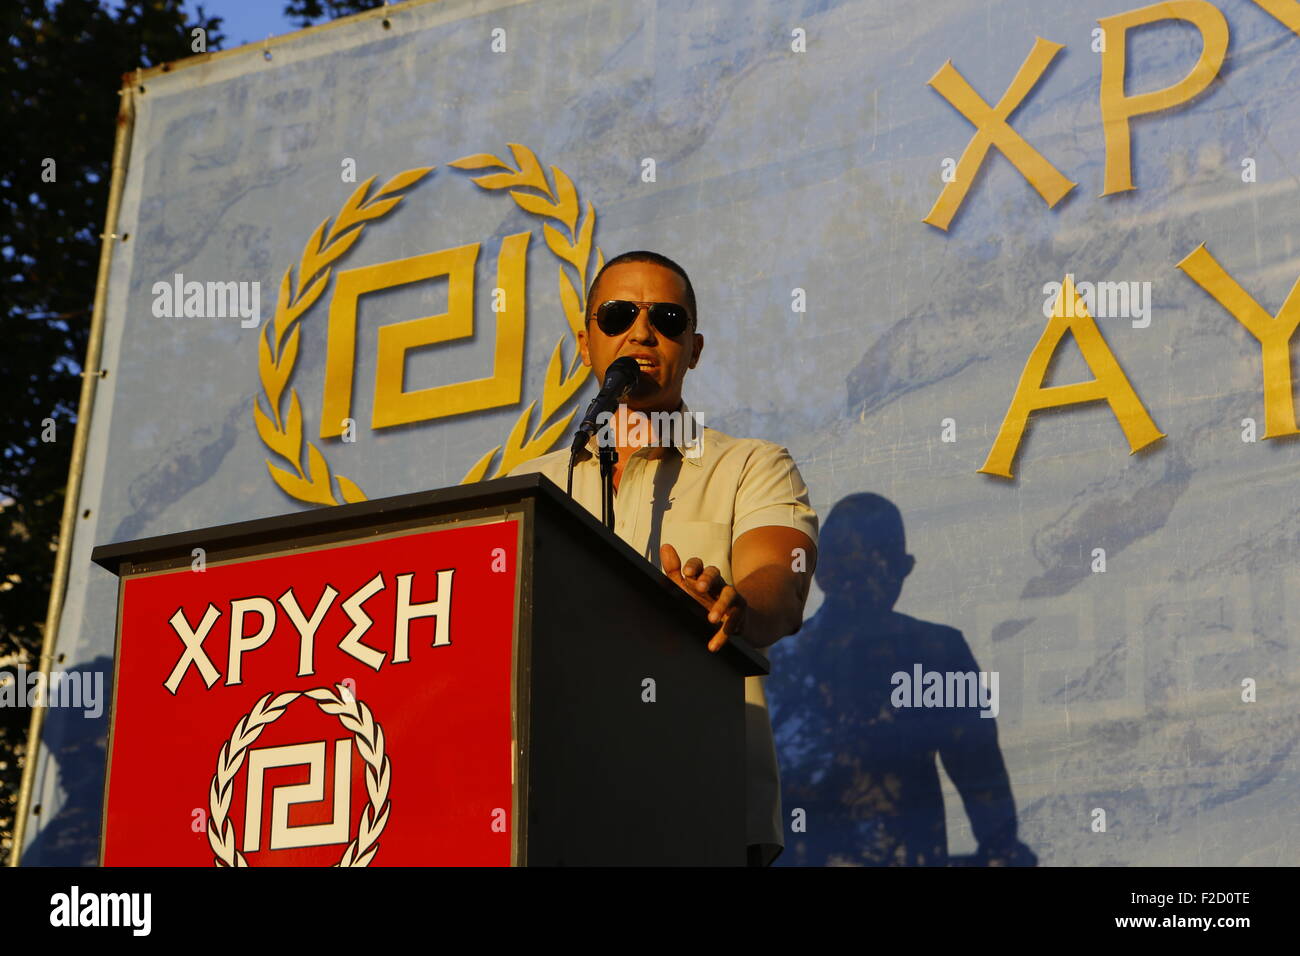 Athens, Greece. 16th September 2015. Ilias Kasidiaris, the spokesperson of Golden Dawn, addresses the election rally. Greek right wing  party Golden Dawn held an election rally in Athens, four days ahead of election day. The party hopes to gain enough seats in the election to become the third latest party in the Greek Parliament. Credit:  Michael Debets/Alamy Live News Stock Photo